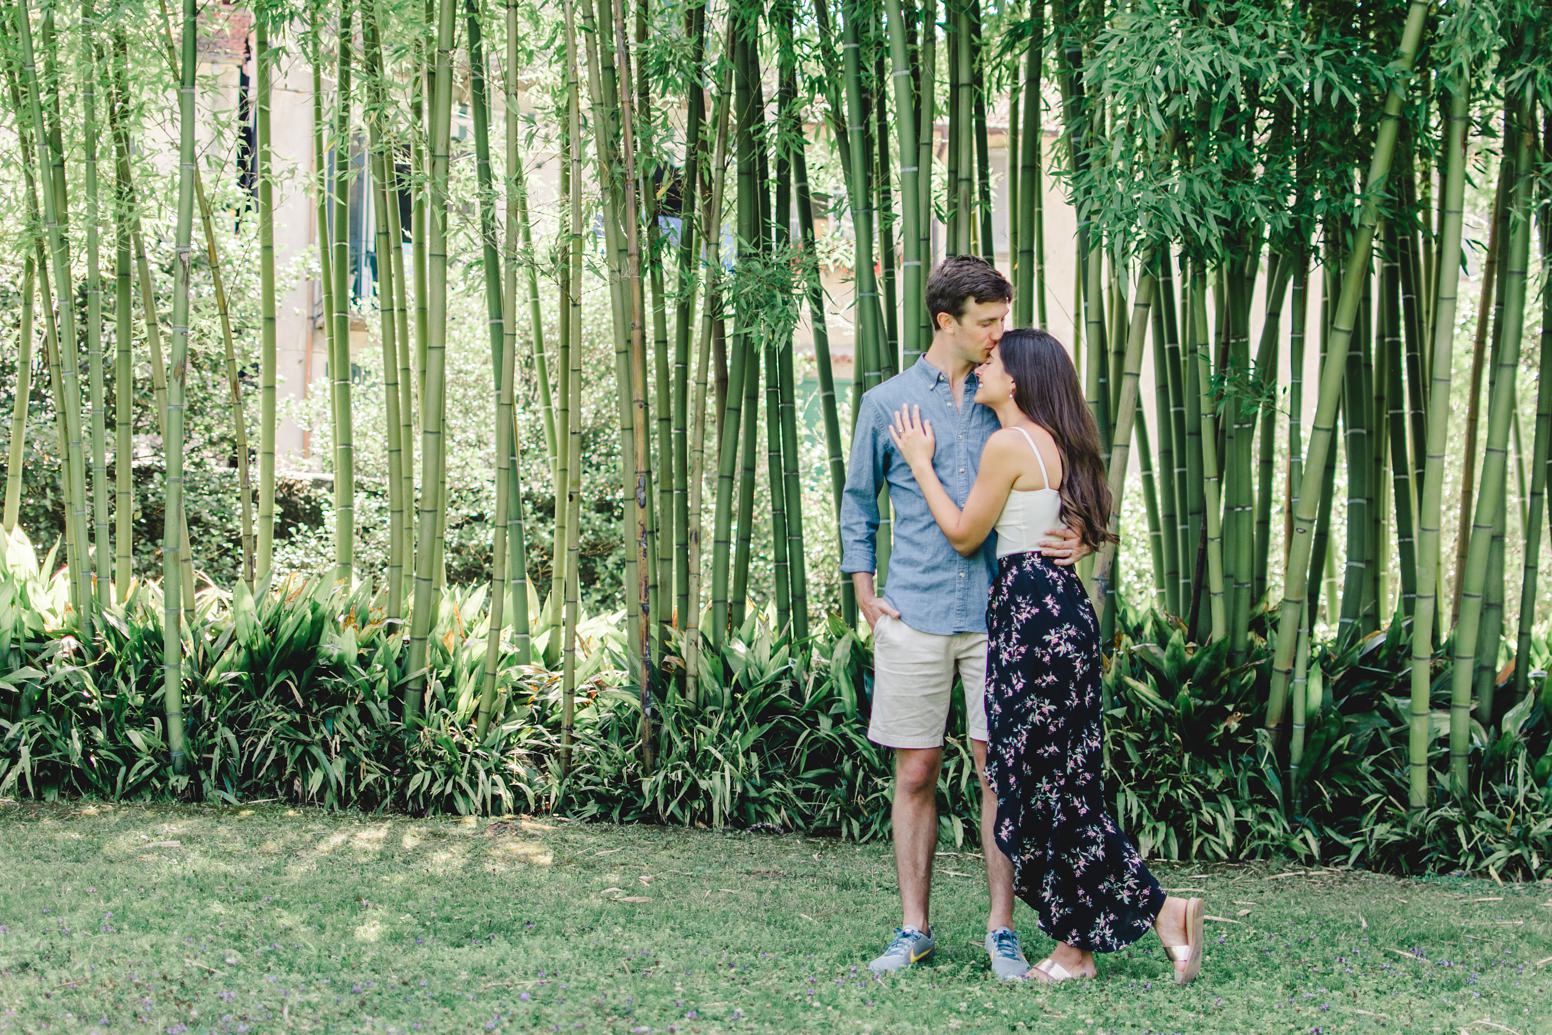 Couple photoshoot in front of bamboo trees in Italy